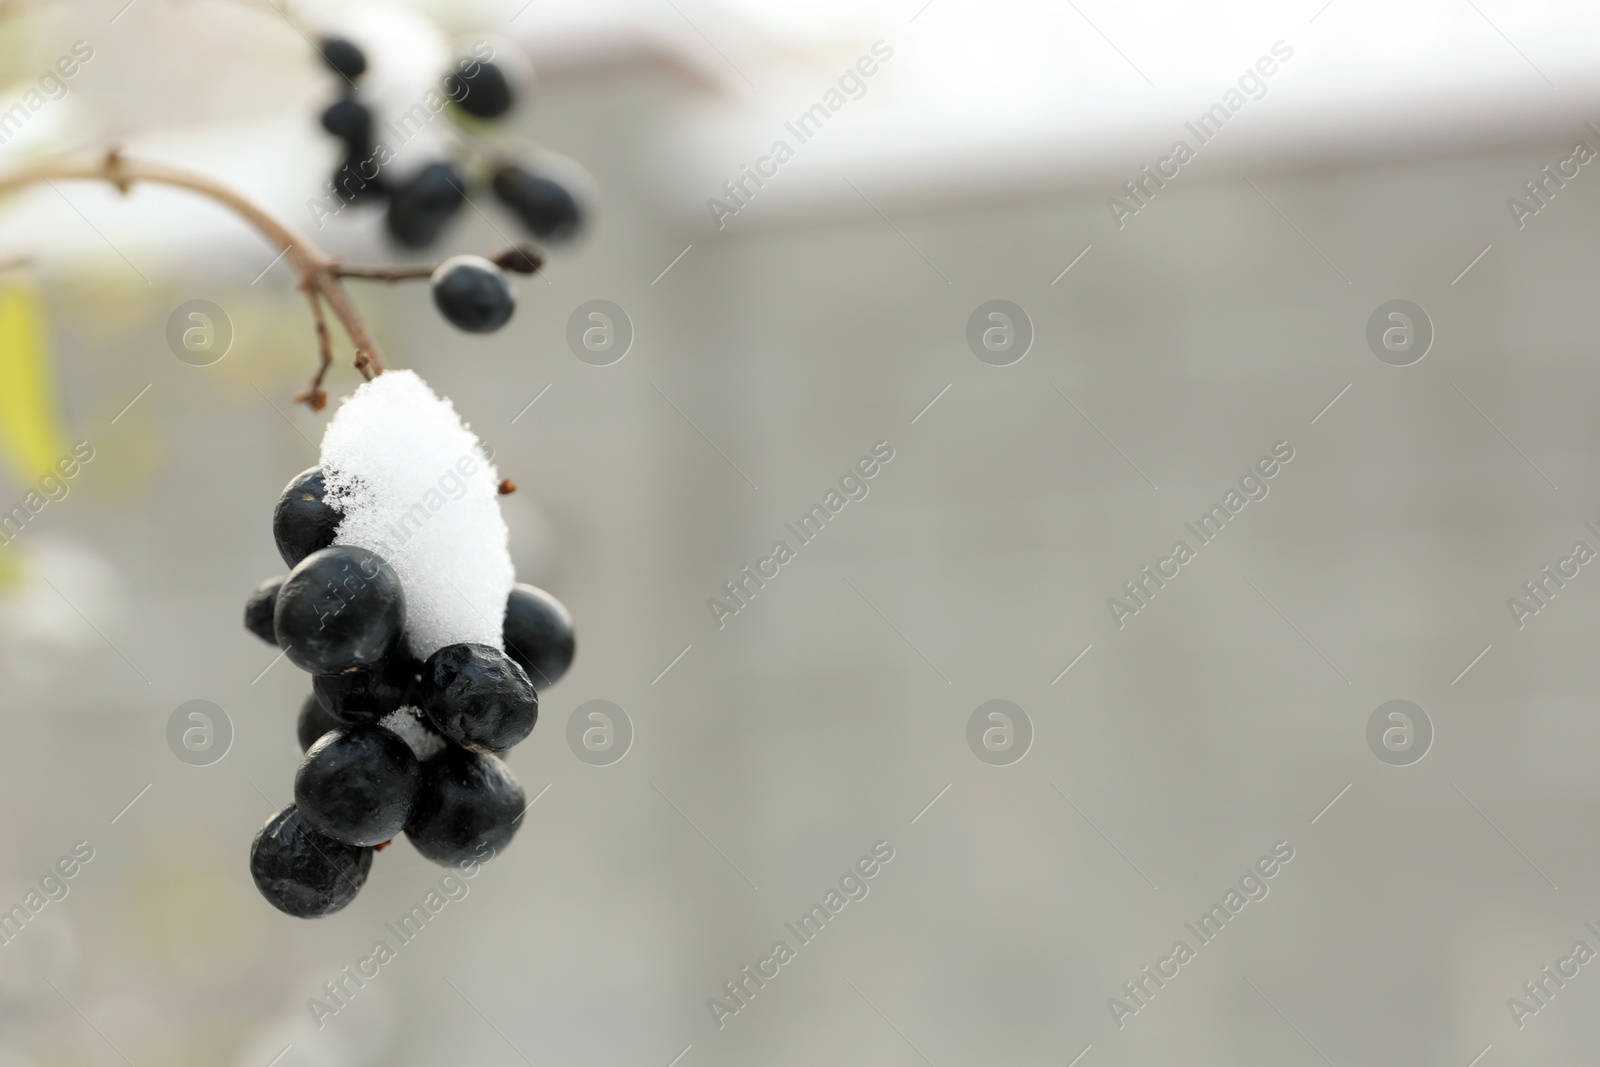 Photo of Shrub with berries outdoors on snowy winter day, closeup. Space for text